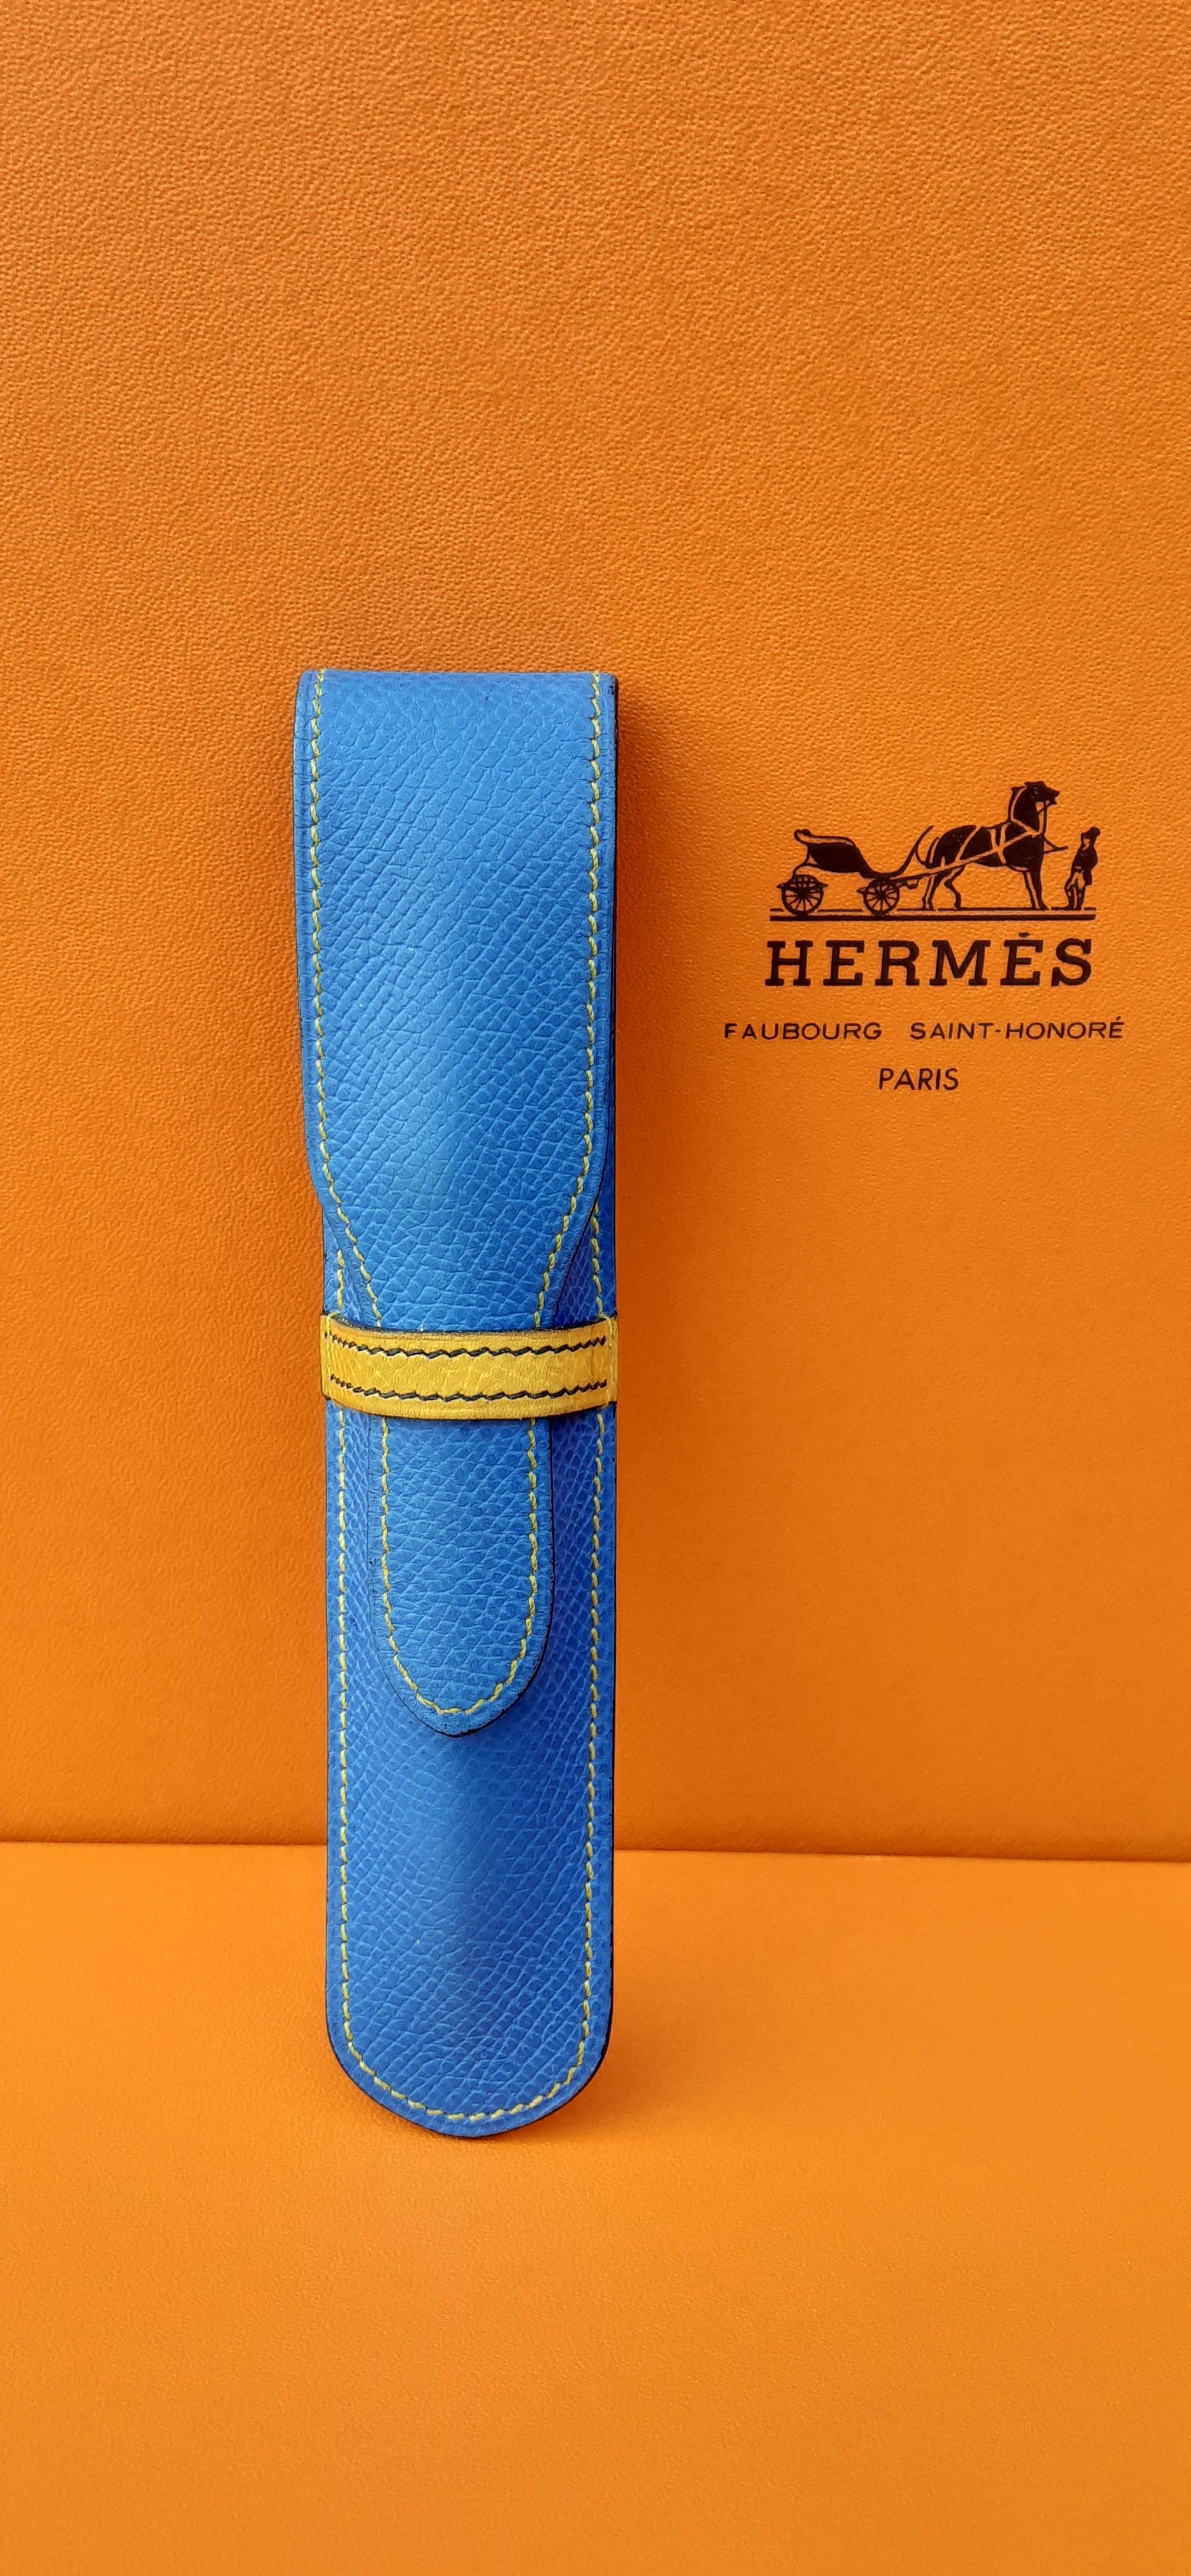 Beautiful Authentic Hermès Pen Case

Made in France

Stamp T in circle (1990)

Made of Courchevel (ex Epsom) Leather

Colorway: Blue, Yellow

